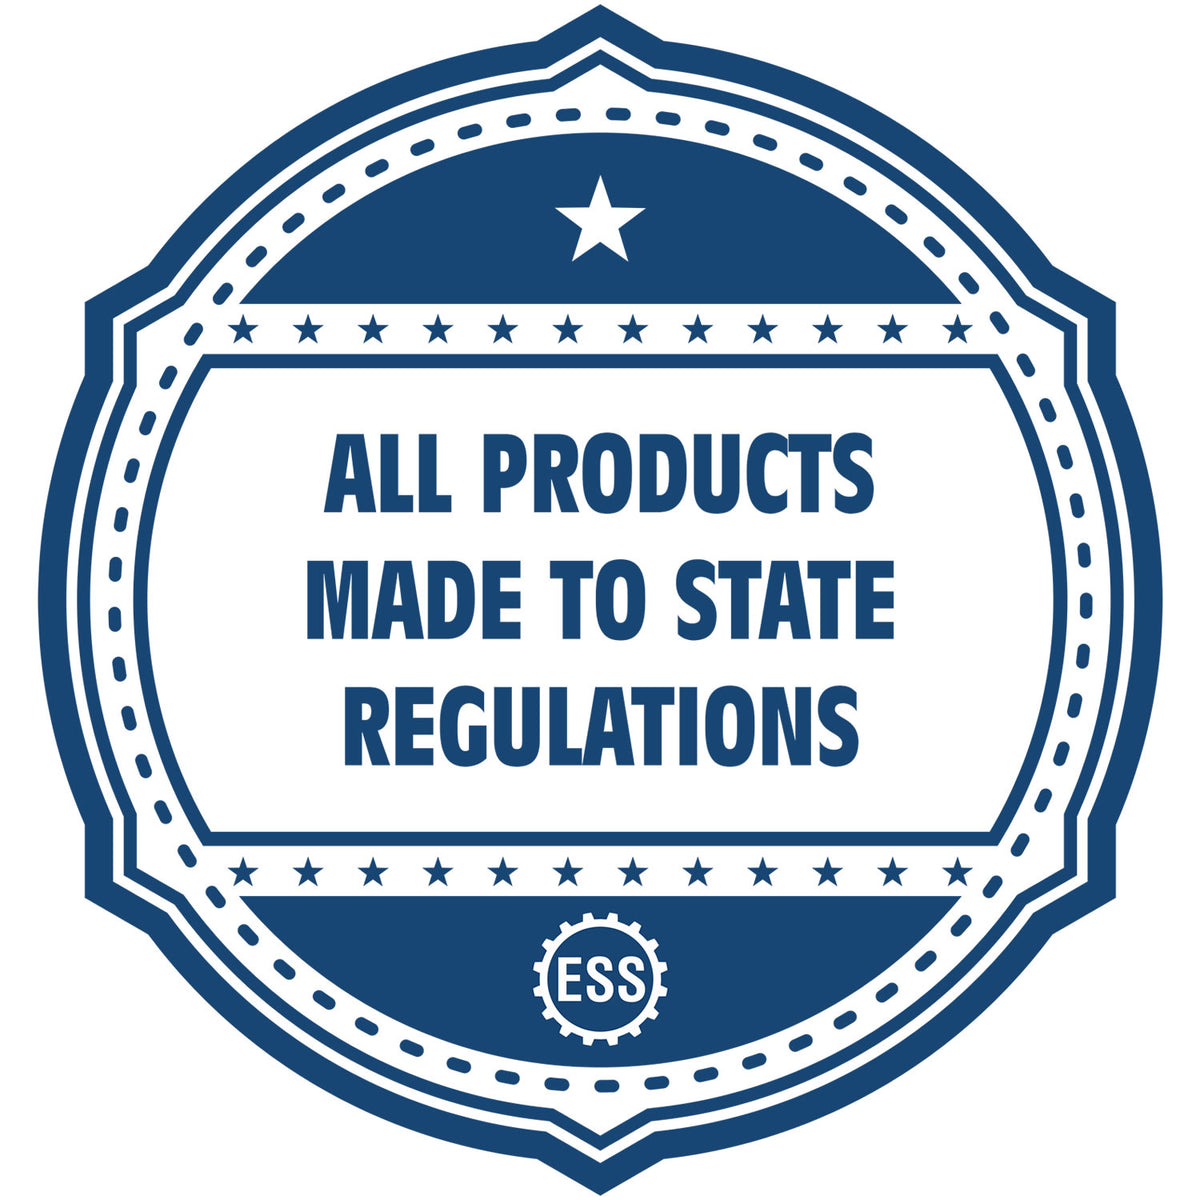 An icon or badge element for the State of New York Extended Long Reach Engineer Seal showing that this product is made in compliance with state regulations.